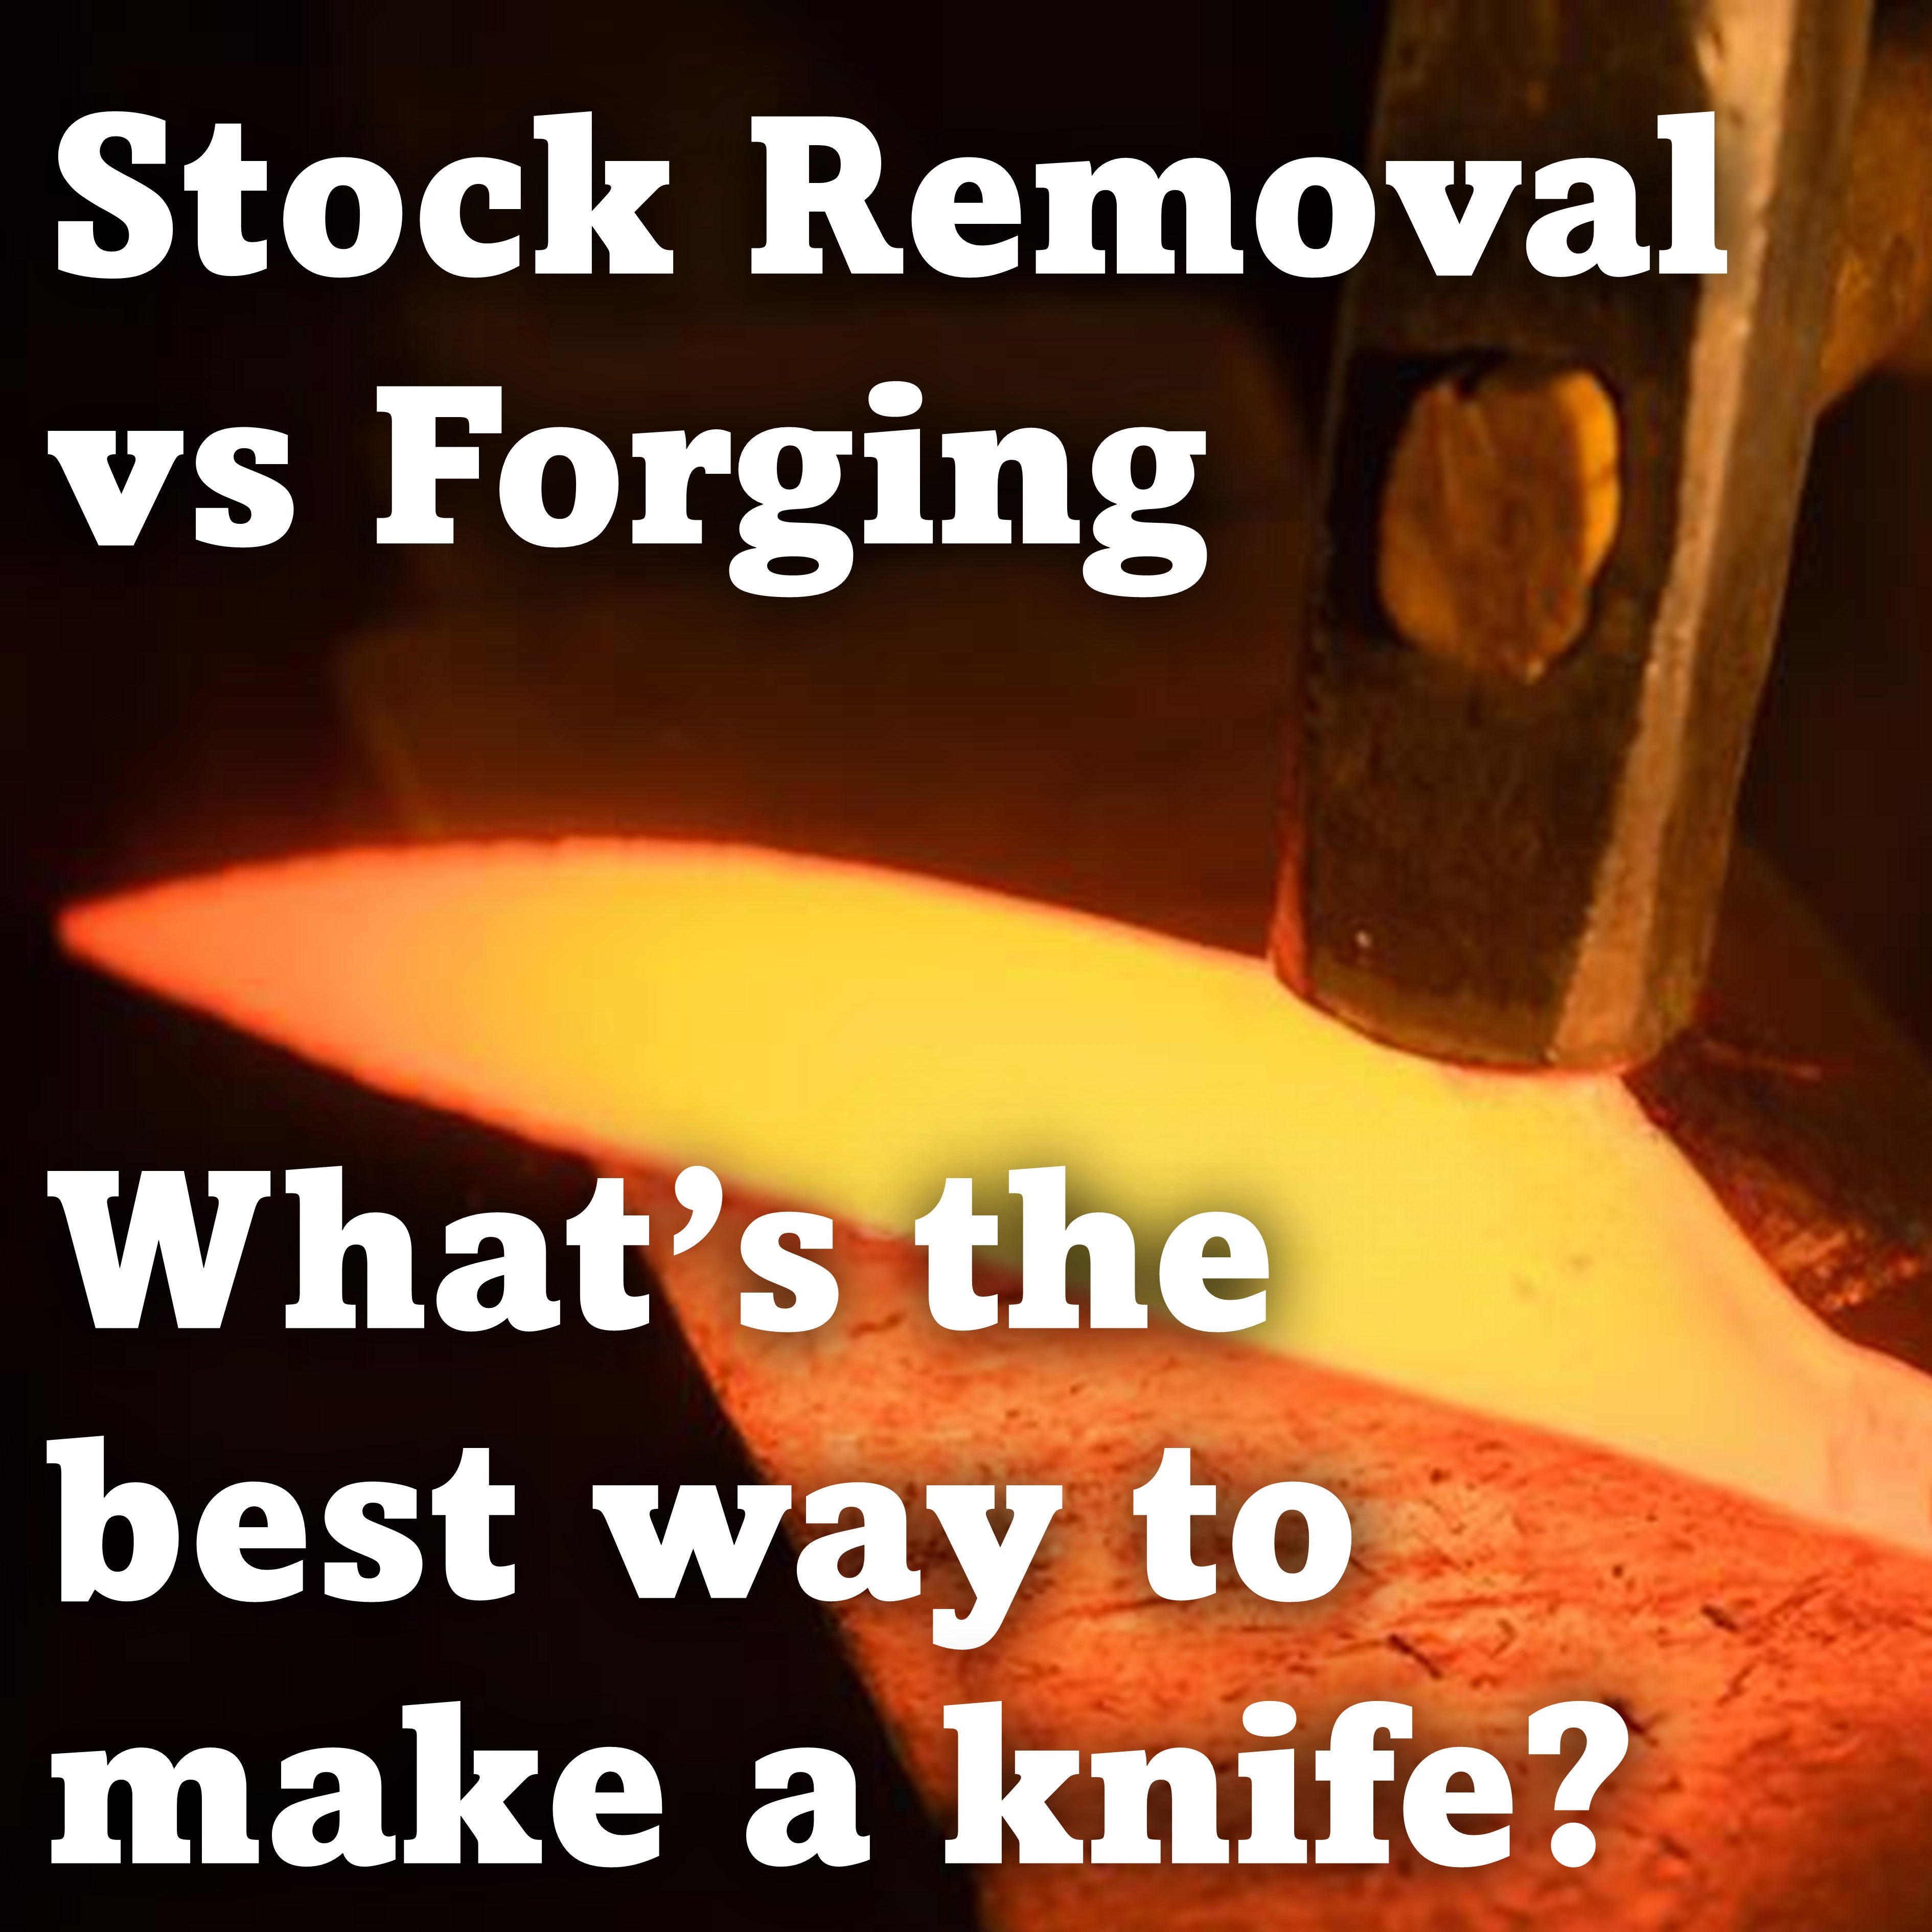 Stock Removal vs Forging, What’s the best way to make a knife?